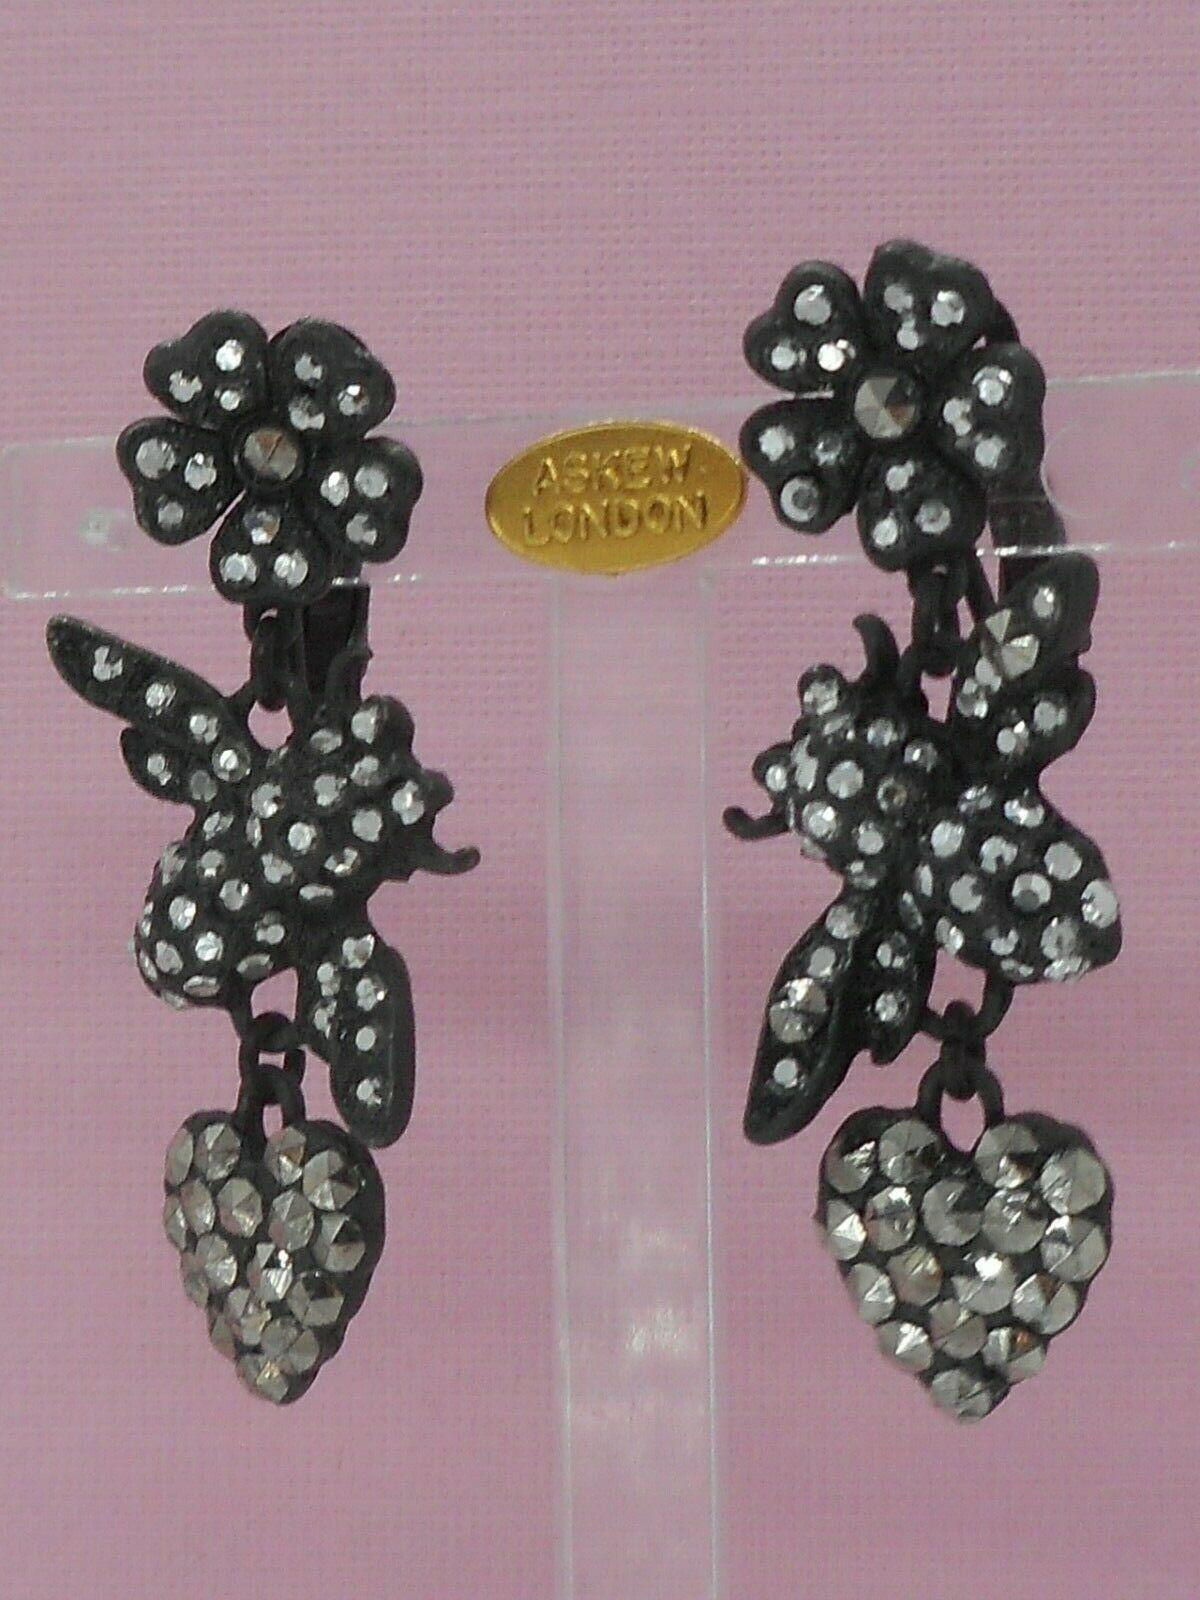 Contemporary Askew London Diamante Hearts  Flowers and Bees Vintage Drop Earring